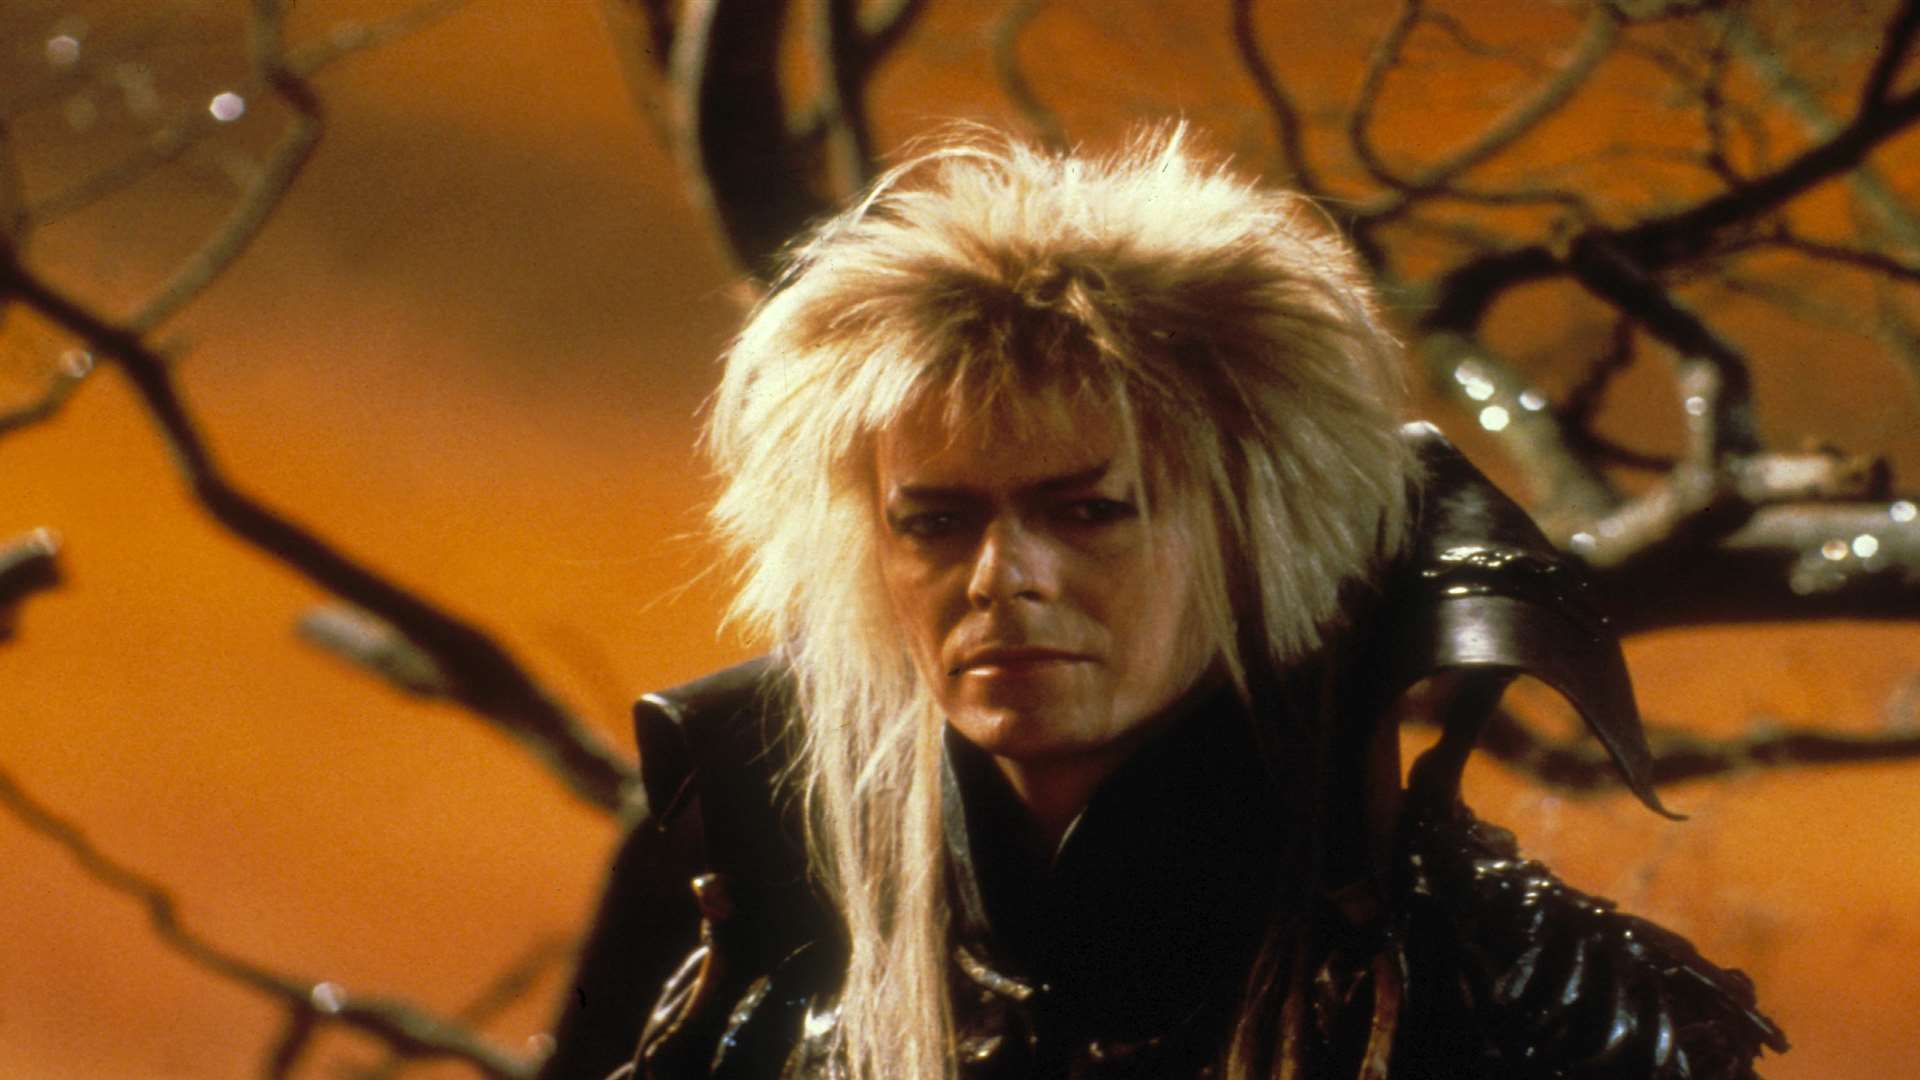 David Bowie in Labyrinth (1986). Picture: Moviestore Collection Ltd